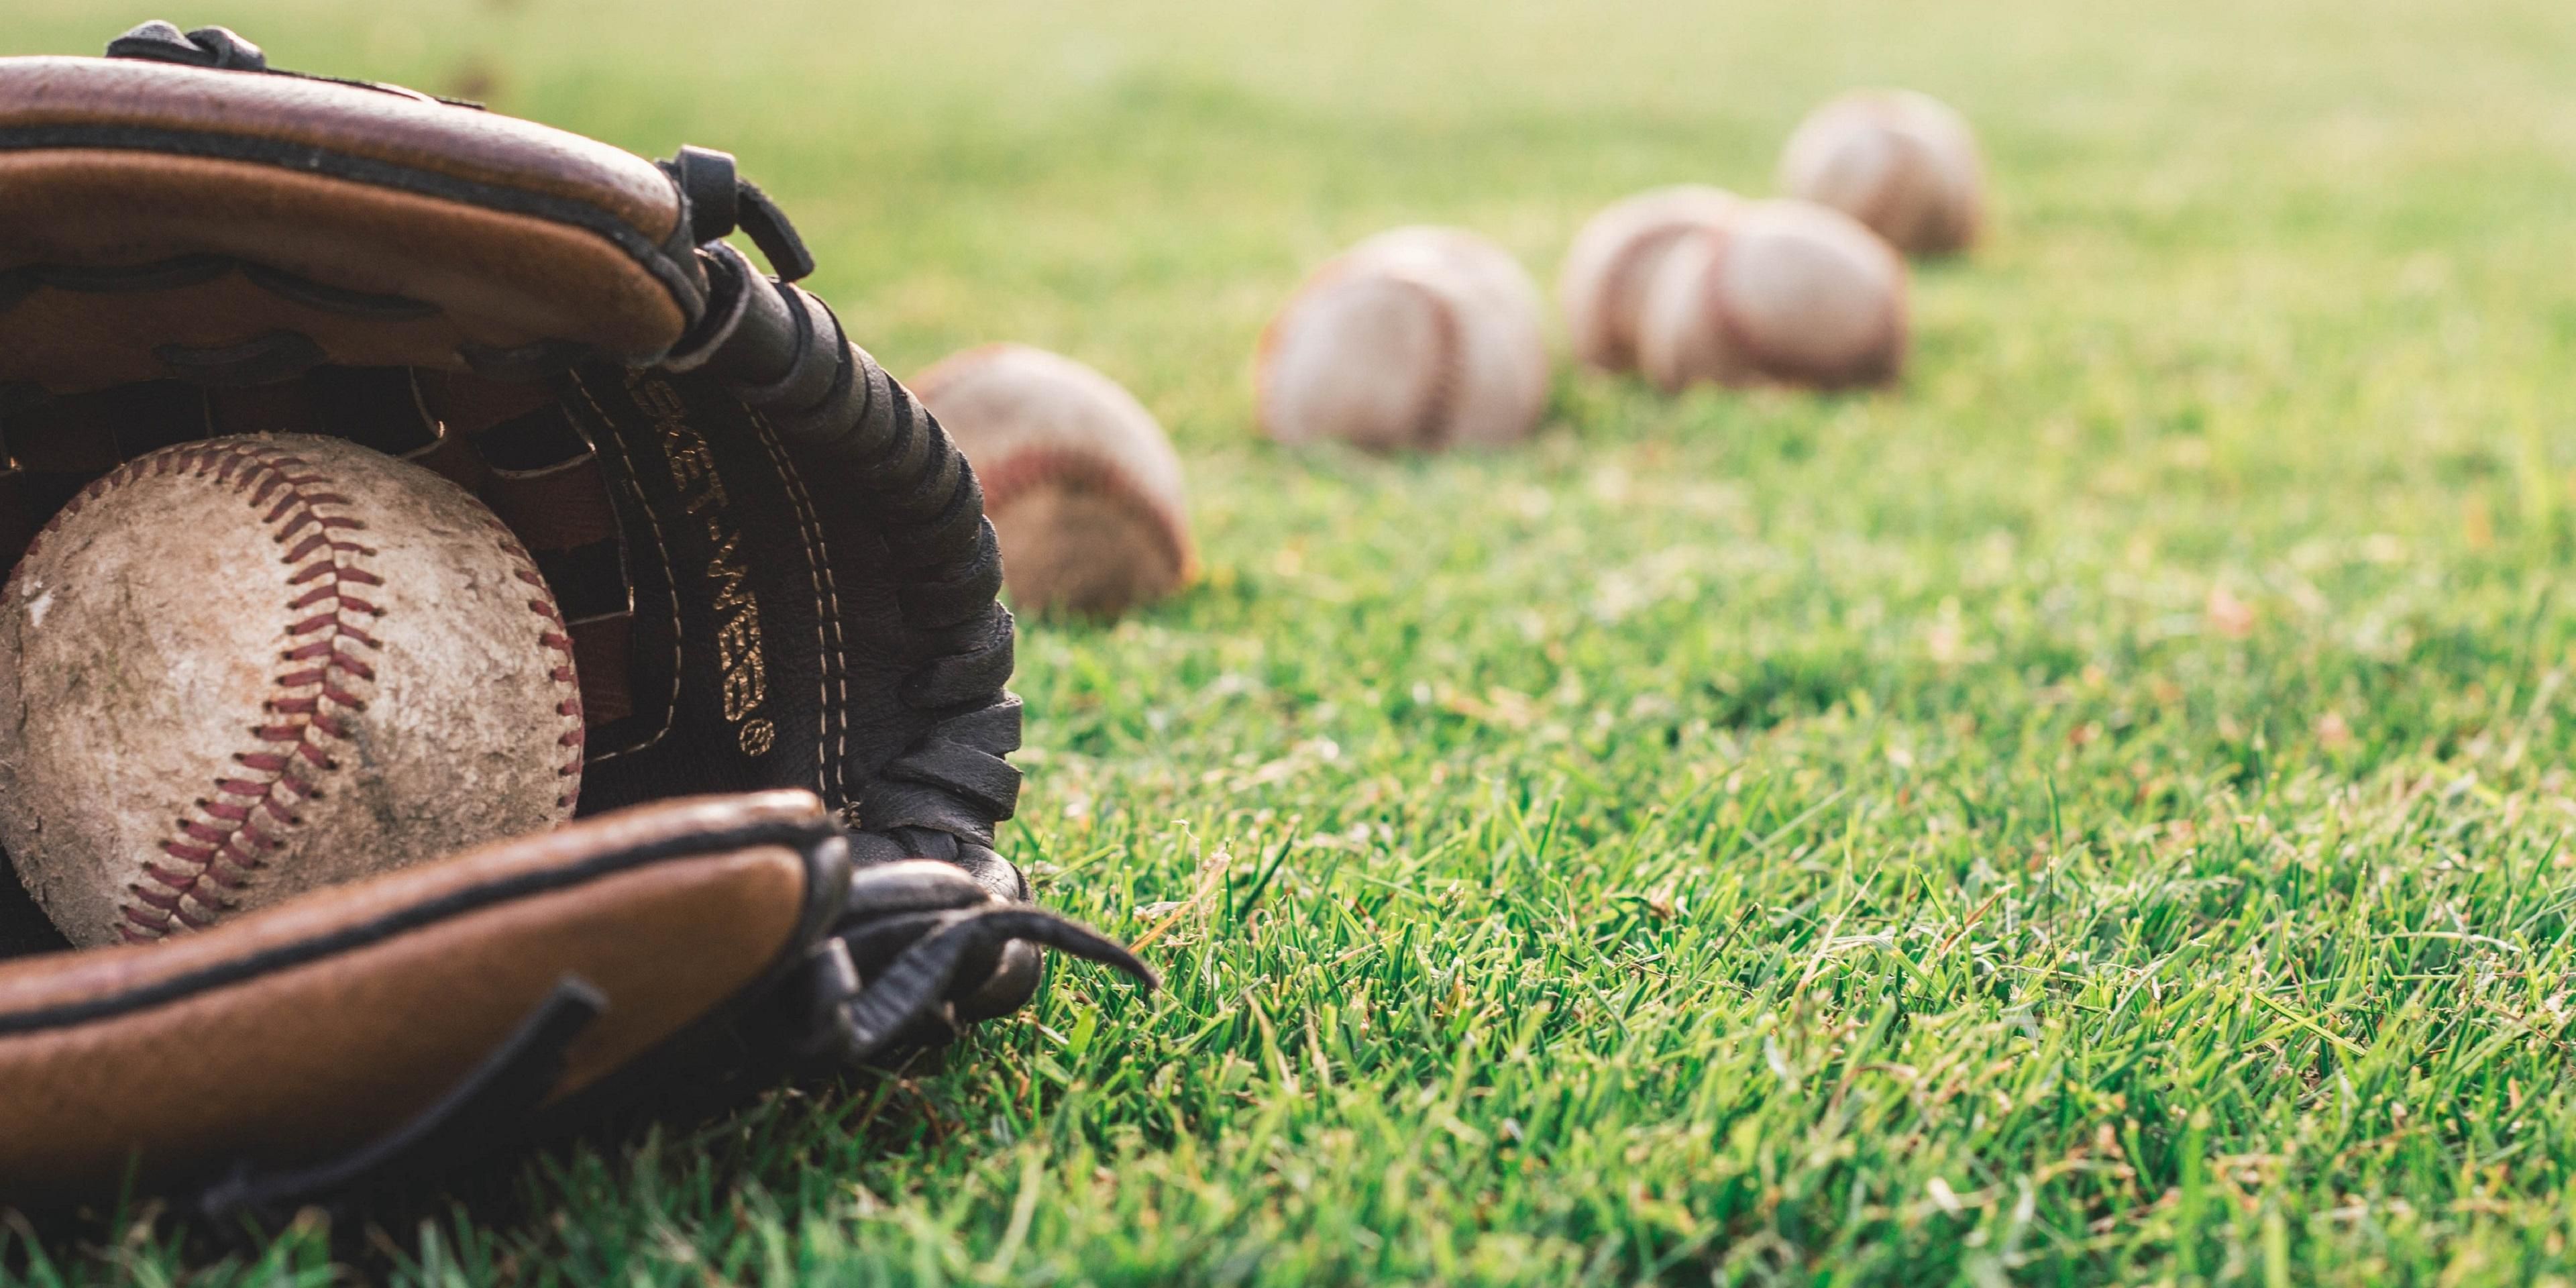 In town for the big game? Play ball and catch our hotel that is conveniently located just minutes away from the Atlanta Braves Stadium, Truist Park, and The Battery Atlanta park.